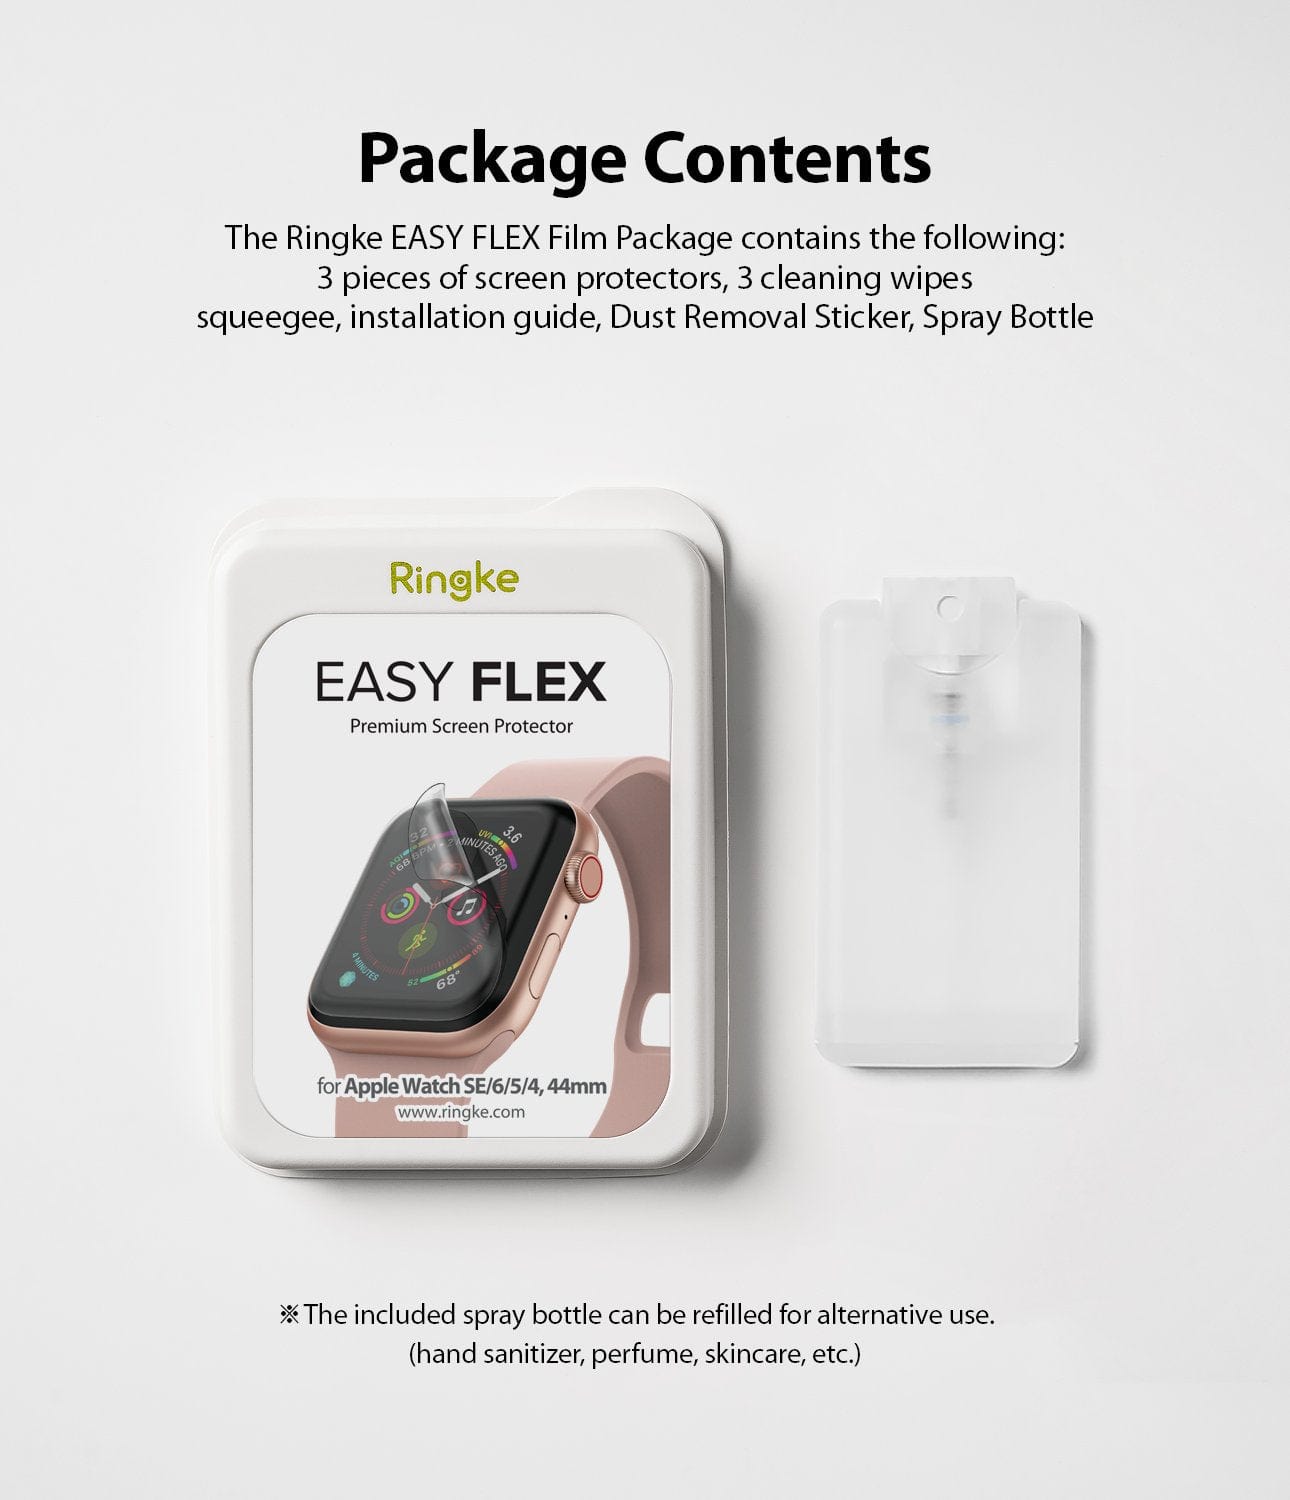 Included in the package are Easy Flex [3 Pack], wet and dry wipes, dust tape, squeegee, spray bottle, and an installation guide for your convenience.